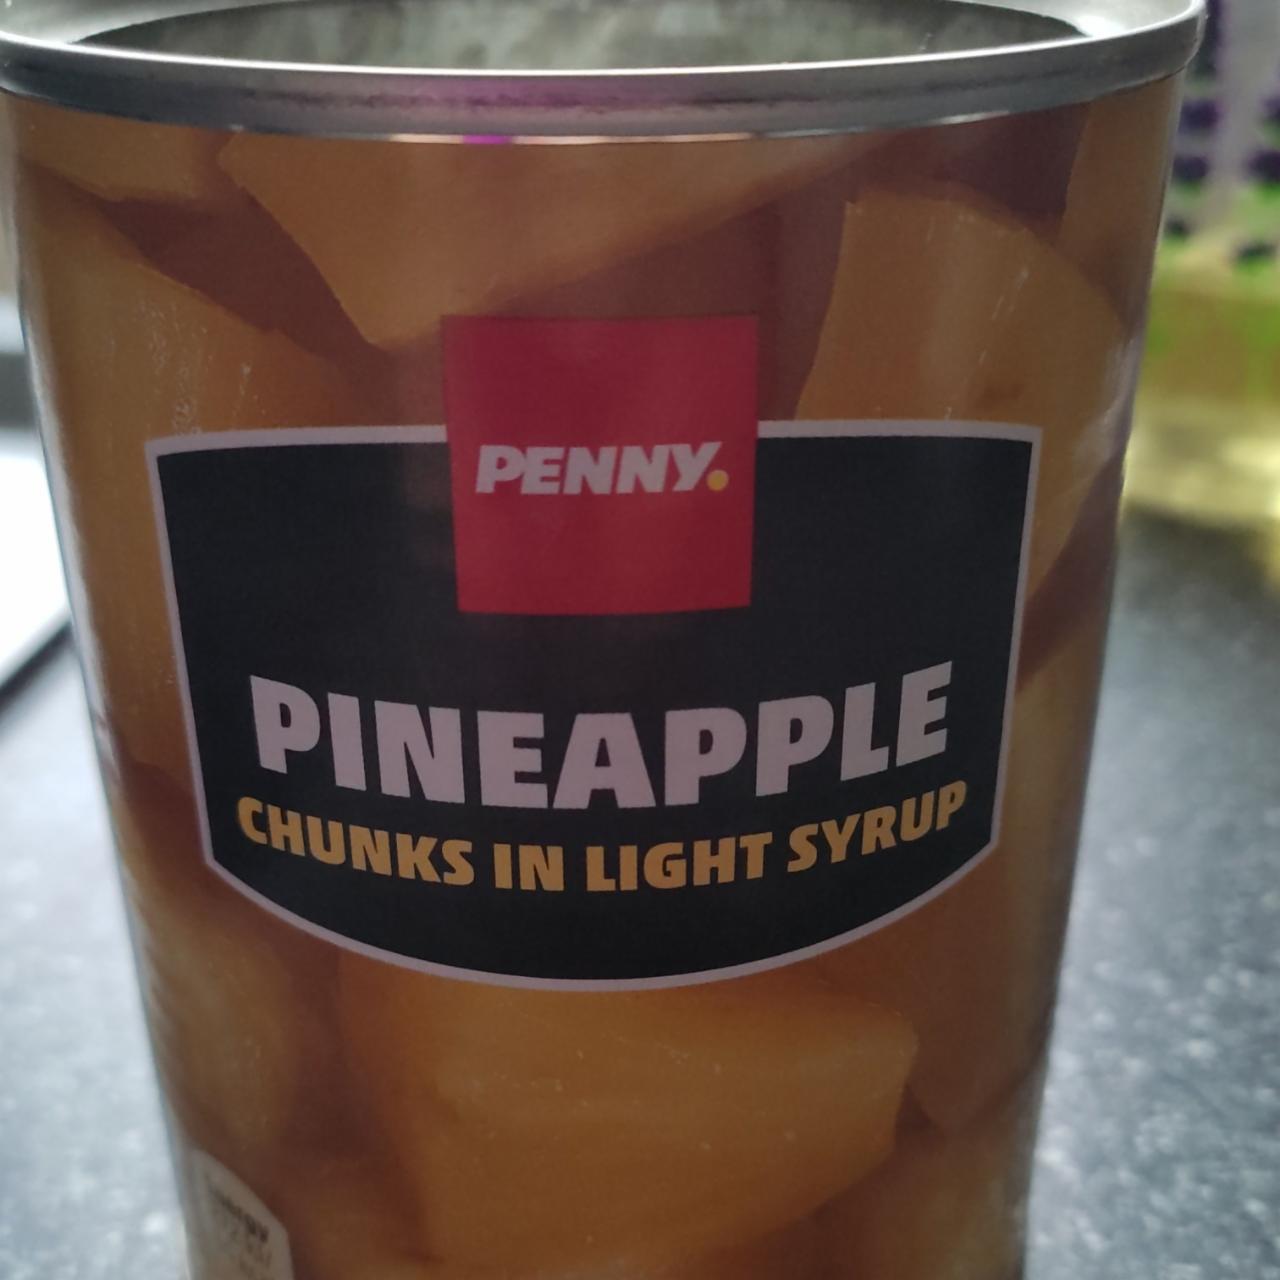 Fotografie - Pineapple chunks in light syrup Penny